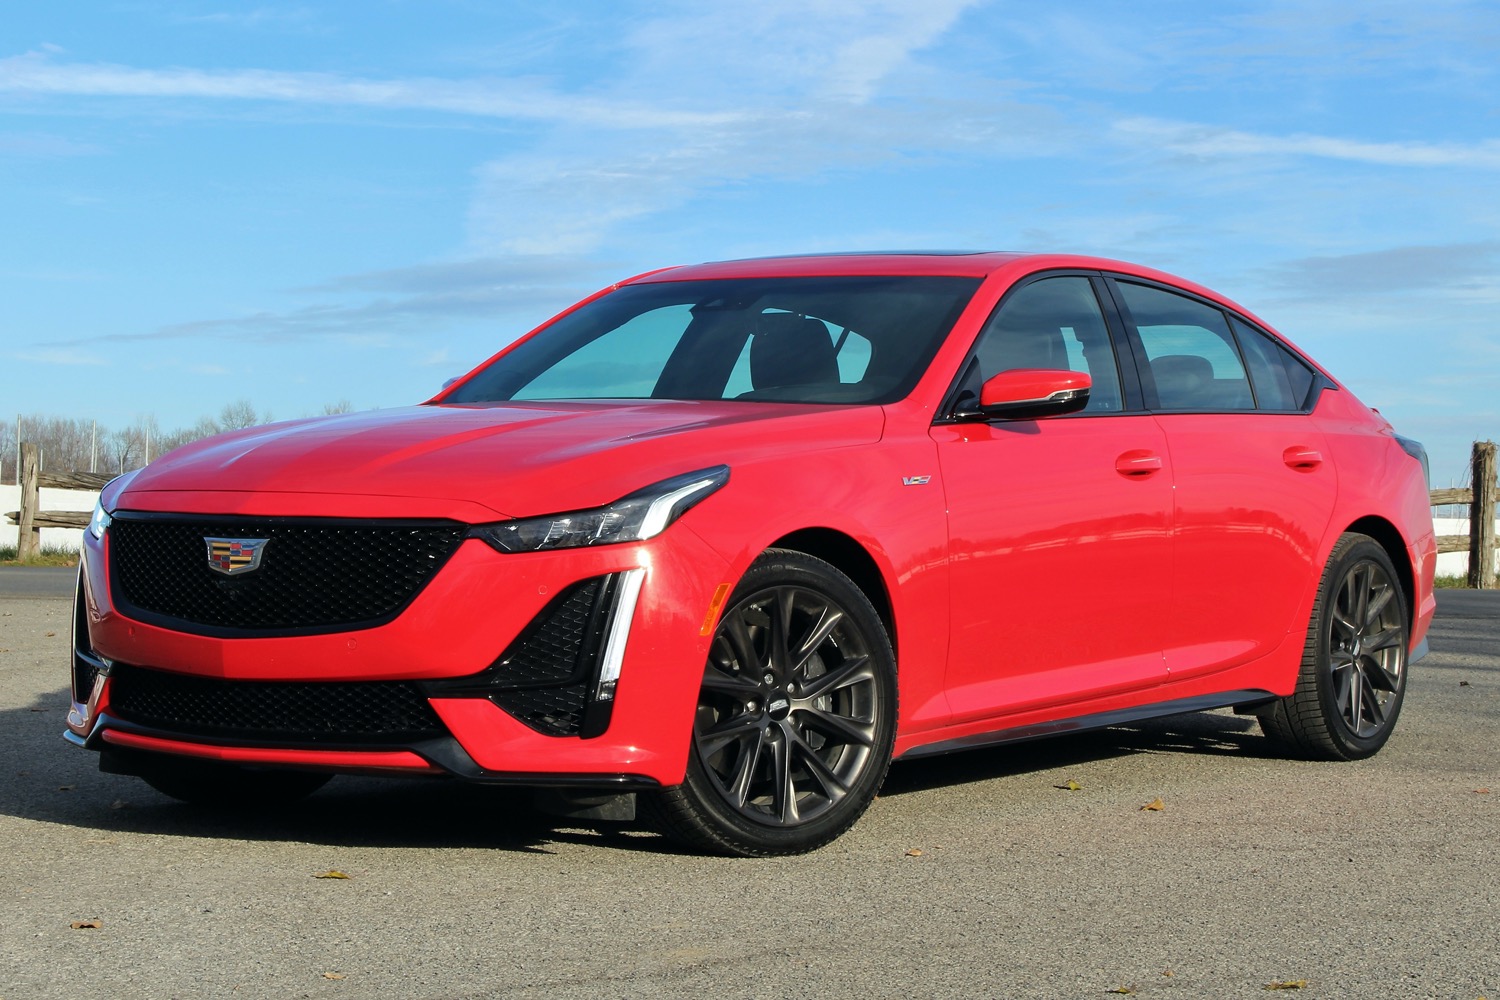 2022 Cadillac CT5-V Info, Specs, Performance, MPG, Pictures, Wiki